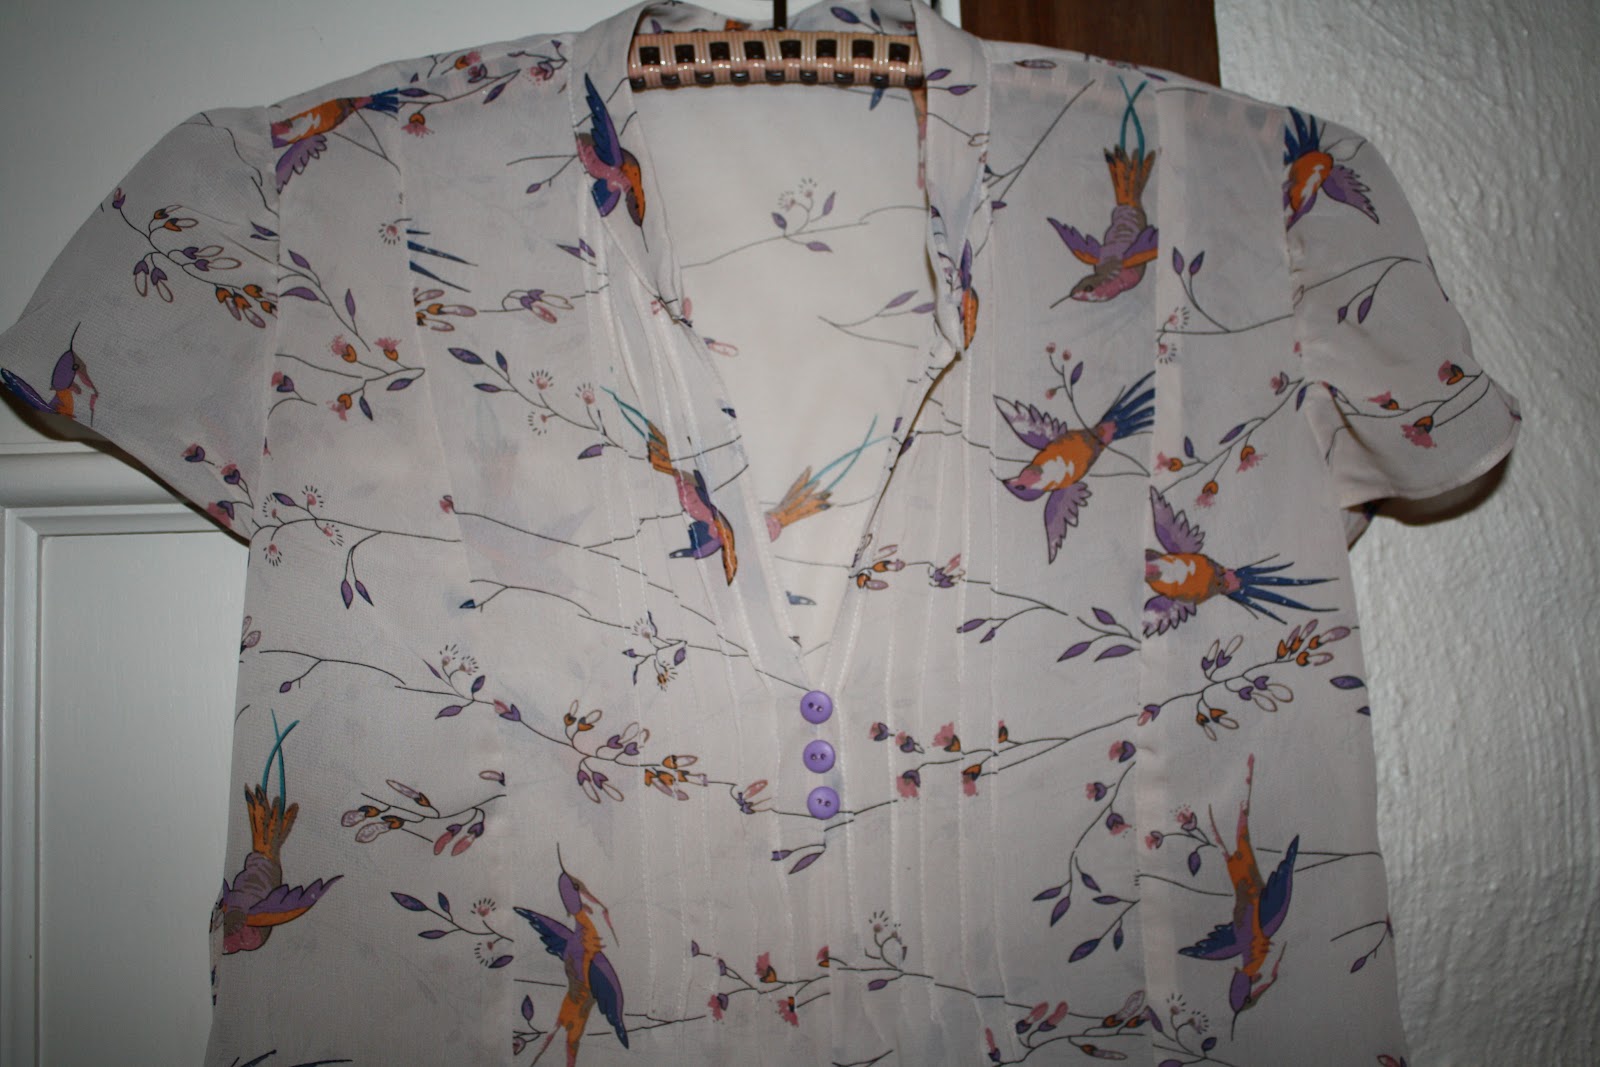 Interrupted Sutures: Simplicity 3786-Hummingbirds for a Honey Top